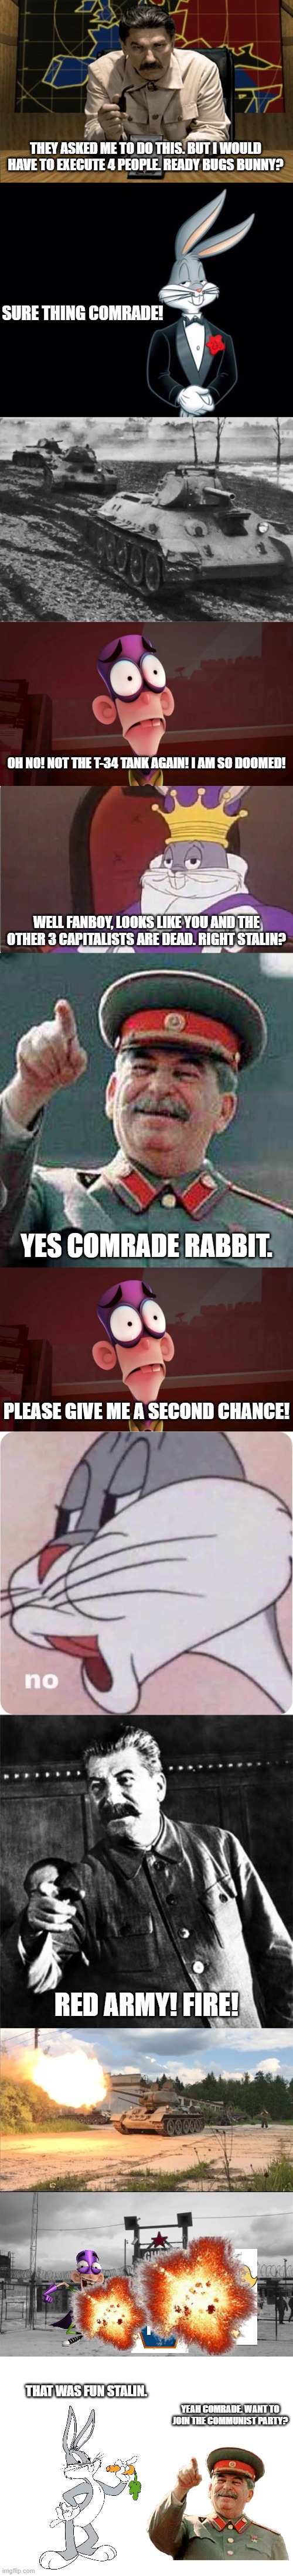 THEY ASKED ME TO DO THIS. BUT I WOULD HAVE TO EXECUTE 4 PEOPLE. READY BUGS BUNNY? SURE THING COMRADE! OH NO! NOT THE T-34 TANK AGAIN! I AM SO DOOMED! WELL FANBOY, LOOKS LIKE YOU AND THE OTHER 3 CAPITALISTS ARE DEAD. RIGHT STALIN? YES COMRADE RABBIT. PLEASE GIVE ME A SECOND CHANCE! RED ARMY! FIRE! THAT WAS FUN STALIN. YEAH COMRADE. WANT TO JOIN THE COMMUNIST PARTY? | image tagged in red alert stalin,stalin says,stalin,joseph stalin,gulag,soviet union | made w/ Imgflip meme maker